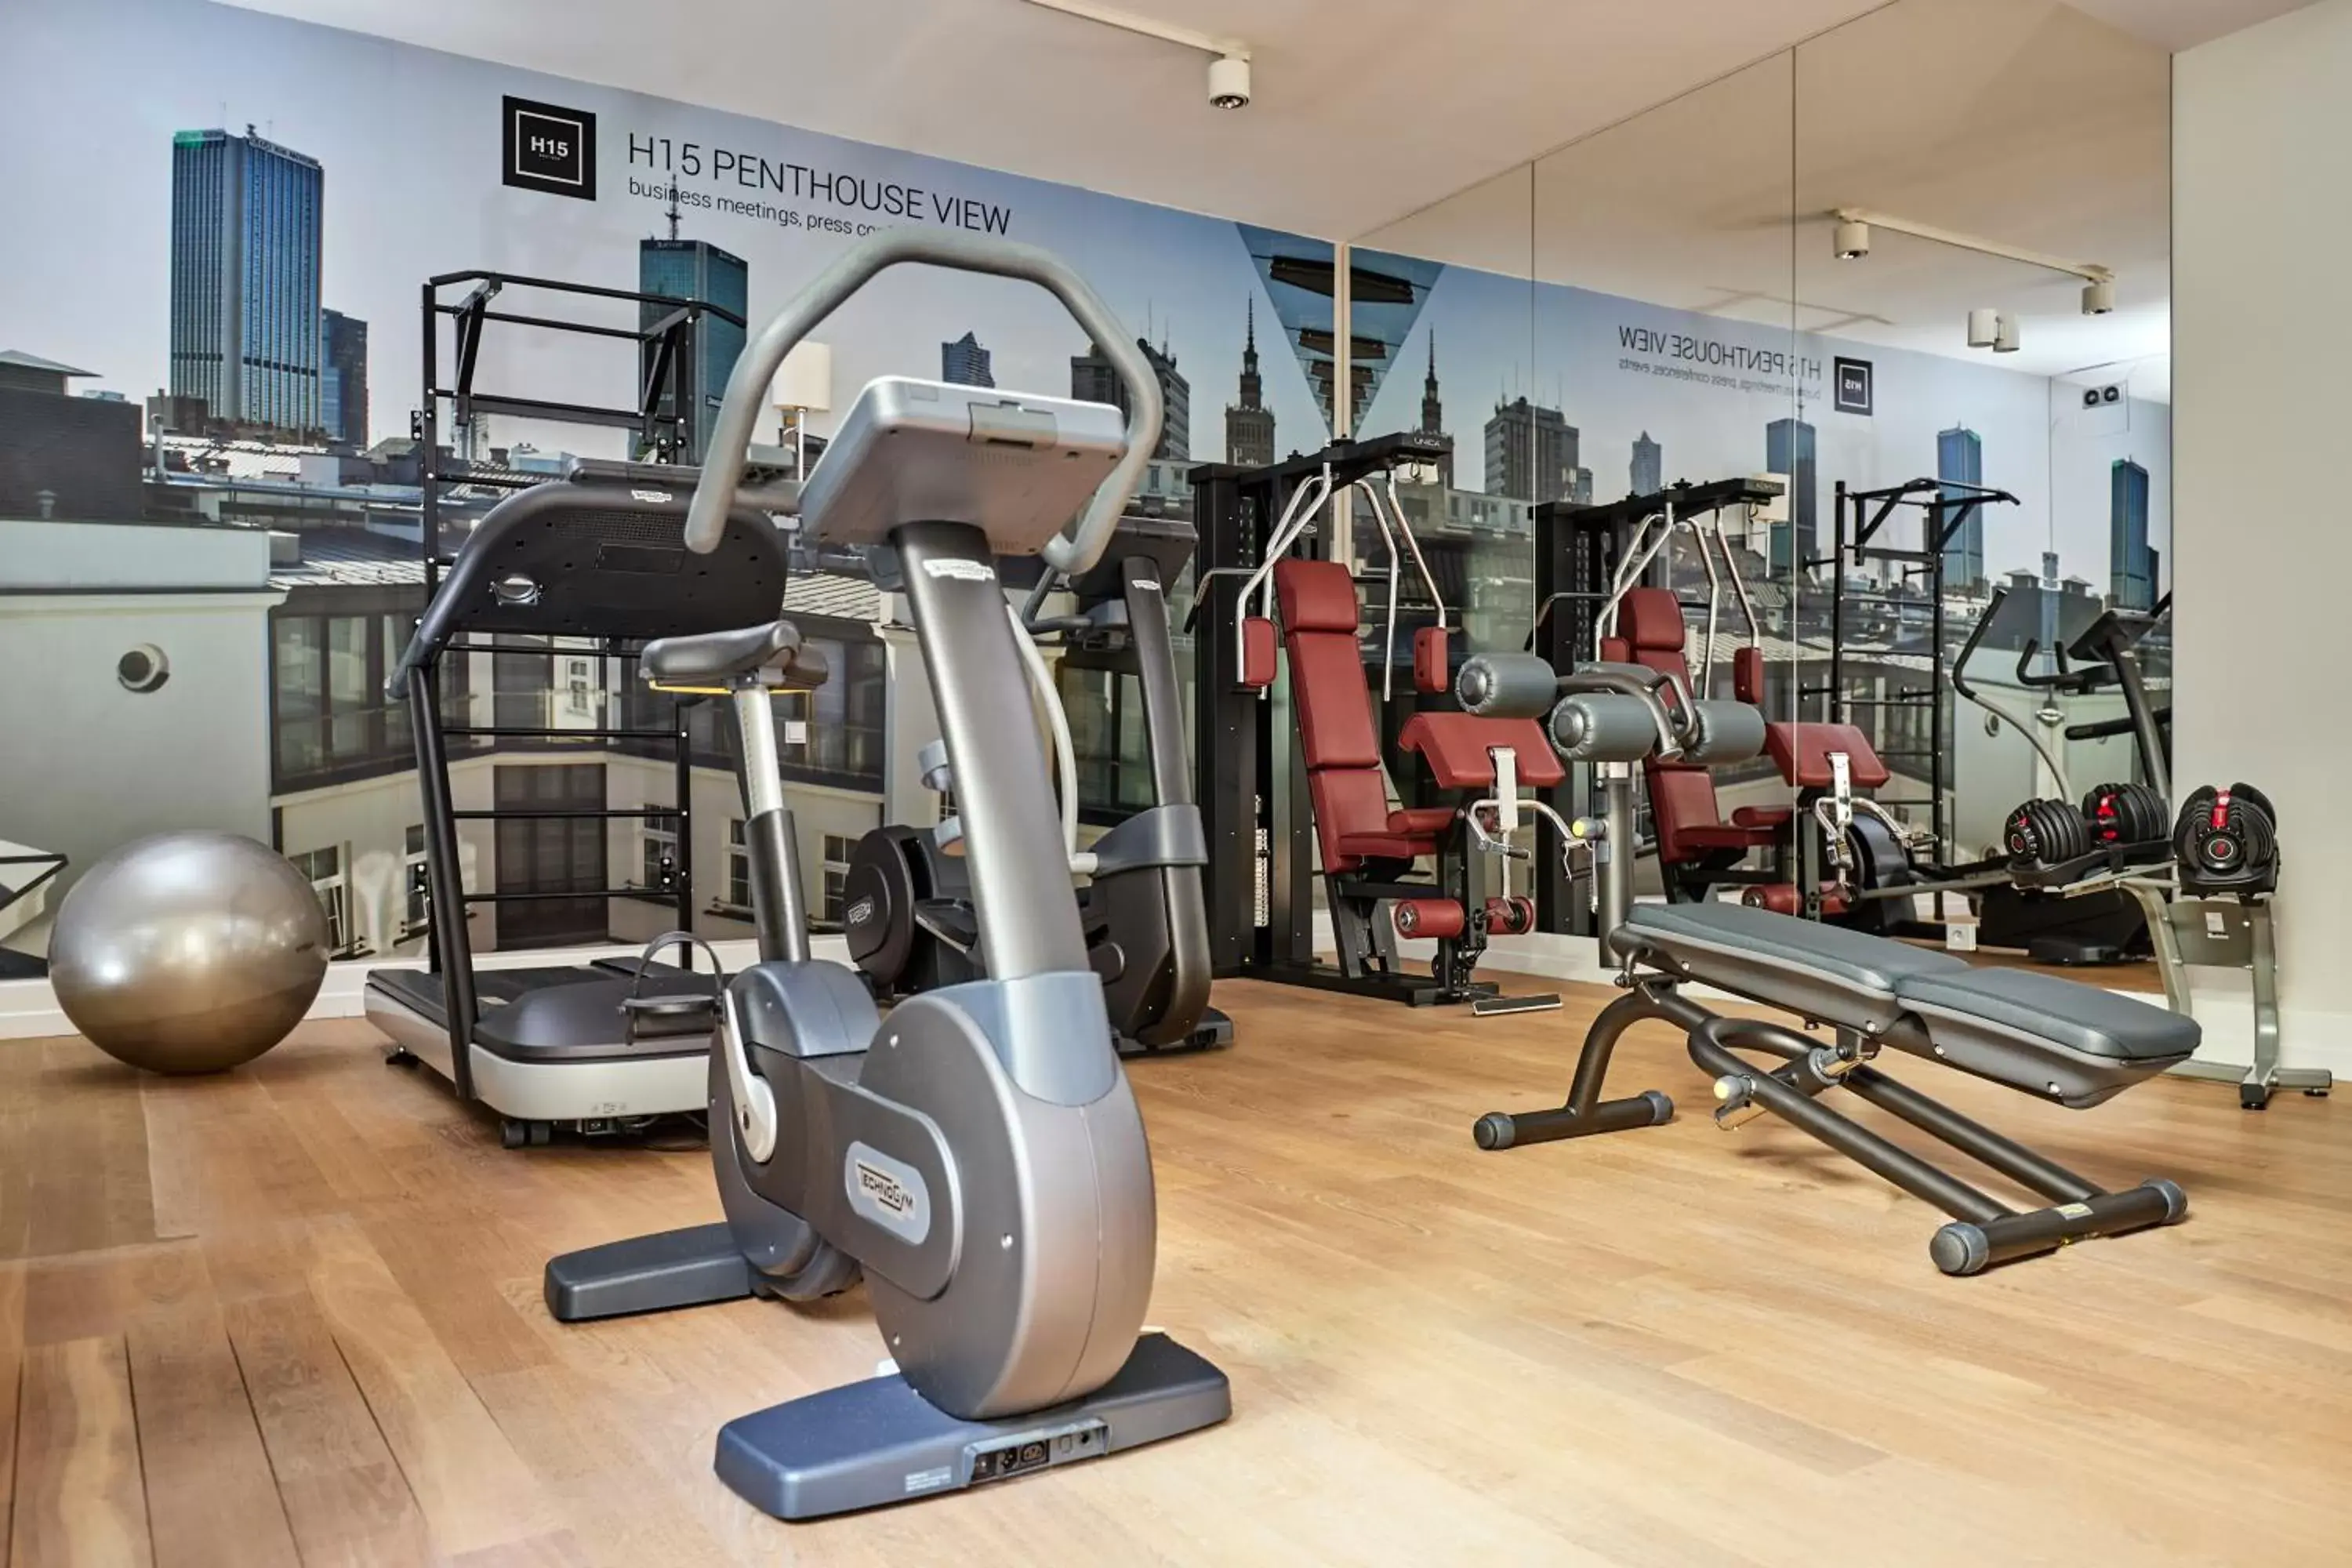 Fitness centre/facilities, Fitness Center/Facilities in H15 Boutique Hotel